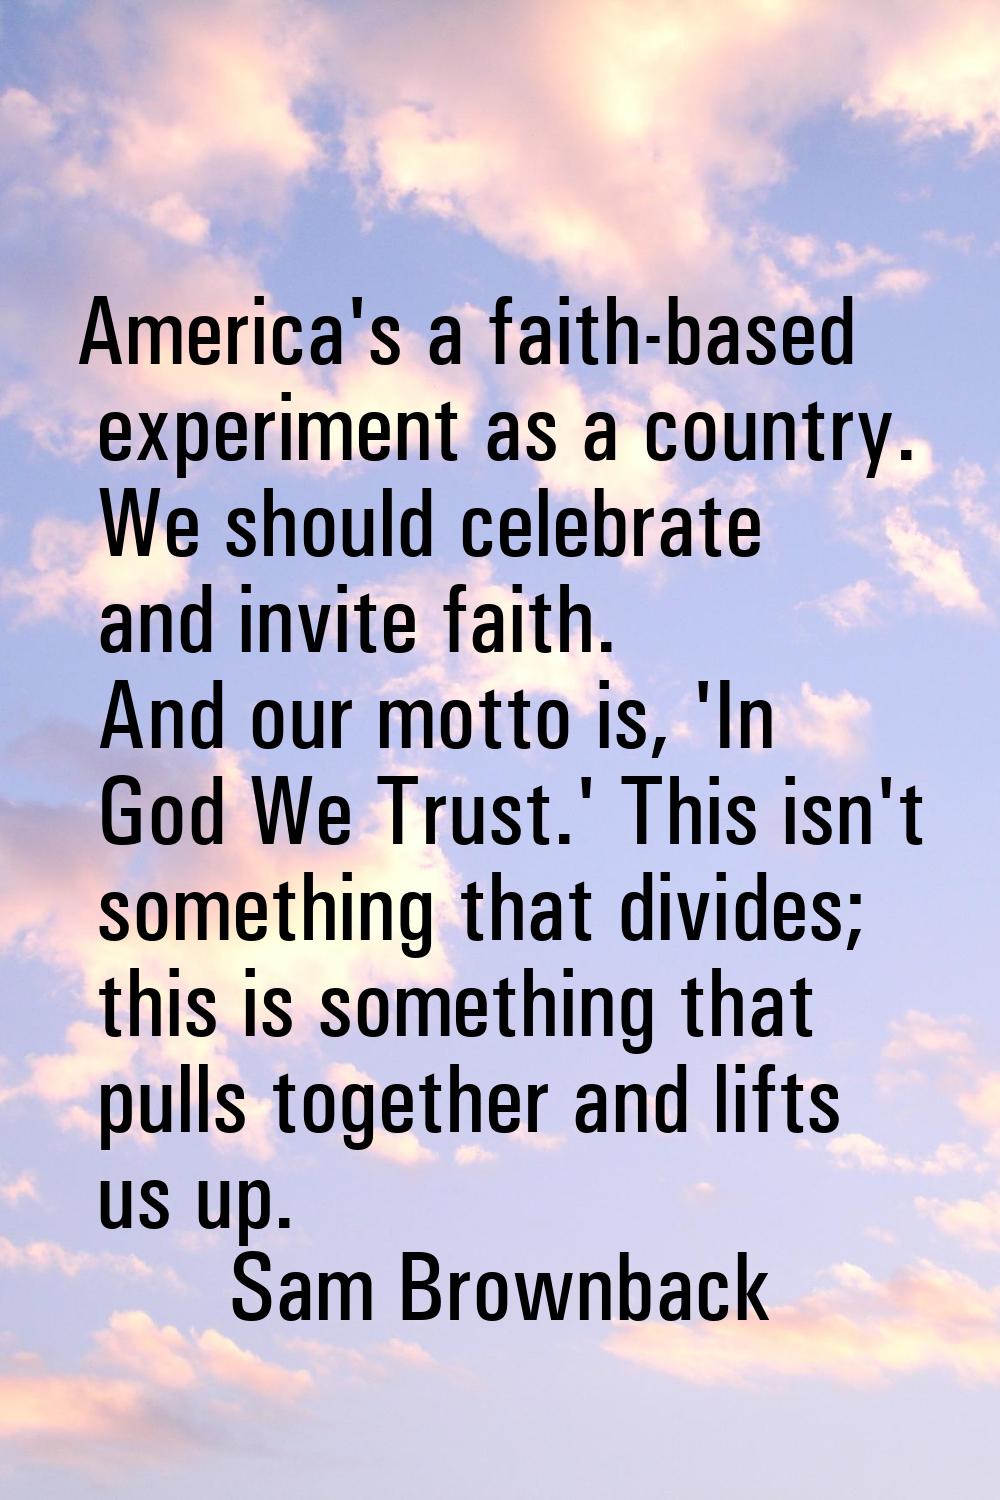 America's a faith-based experiment as a country. We should celebrate and invite faith. And our mott